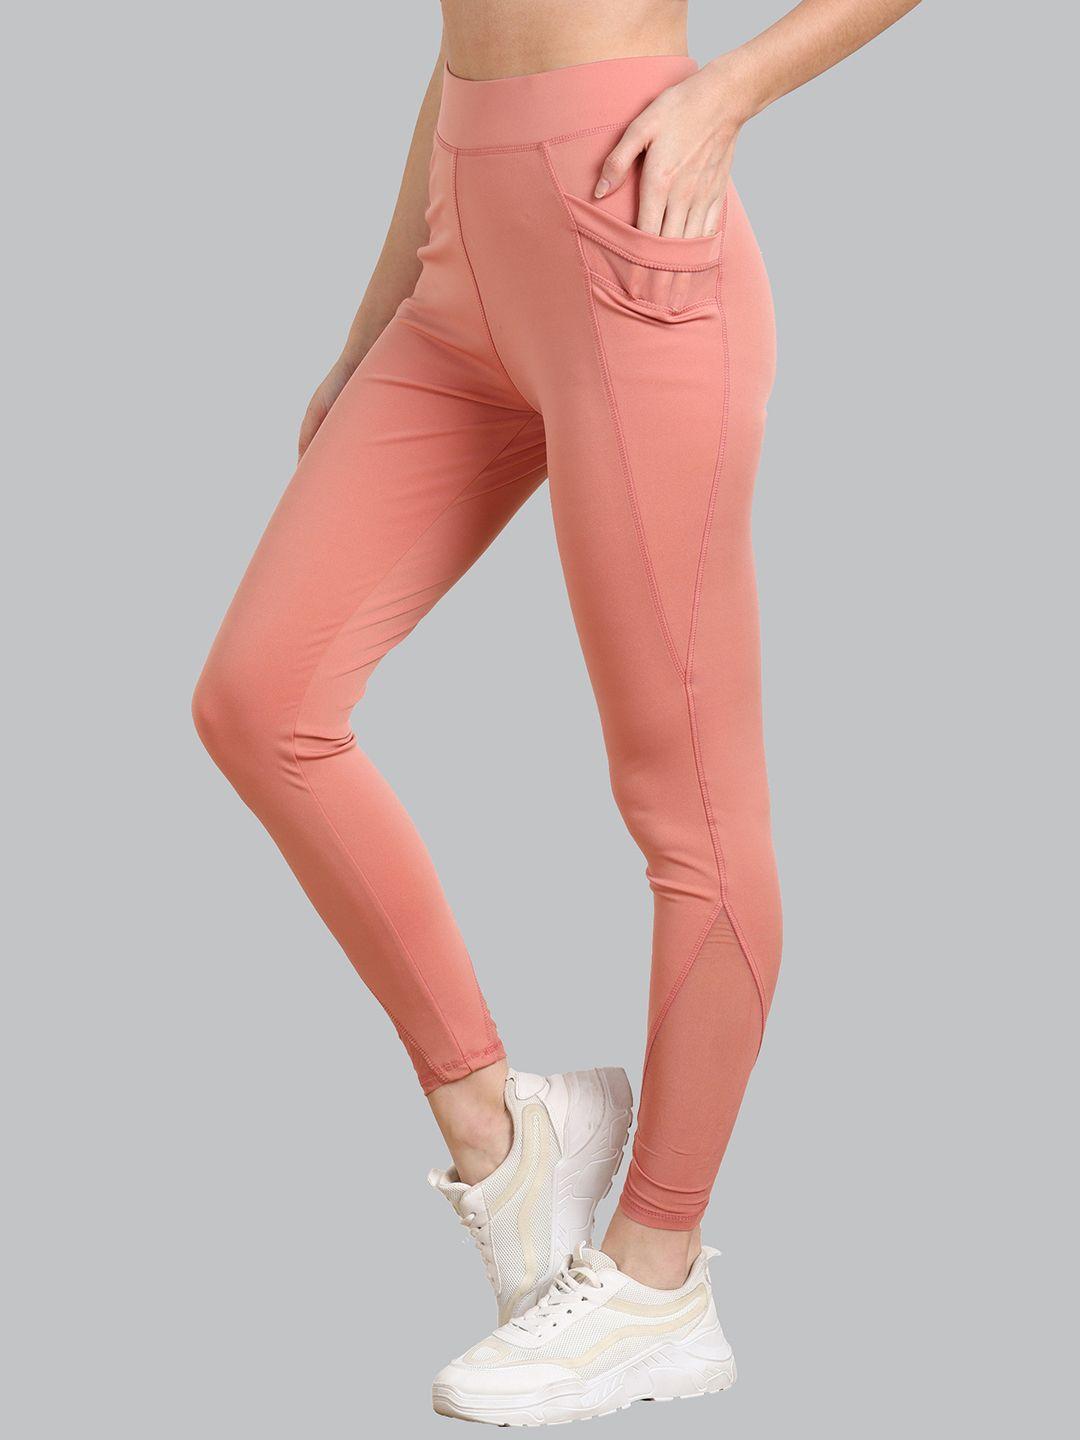 sharktribe-women-peach-solid-ankle-length-tights